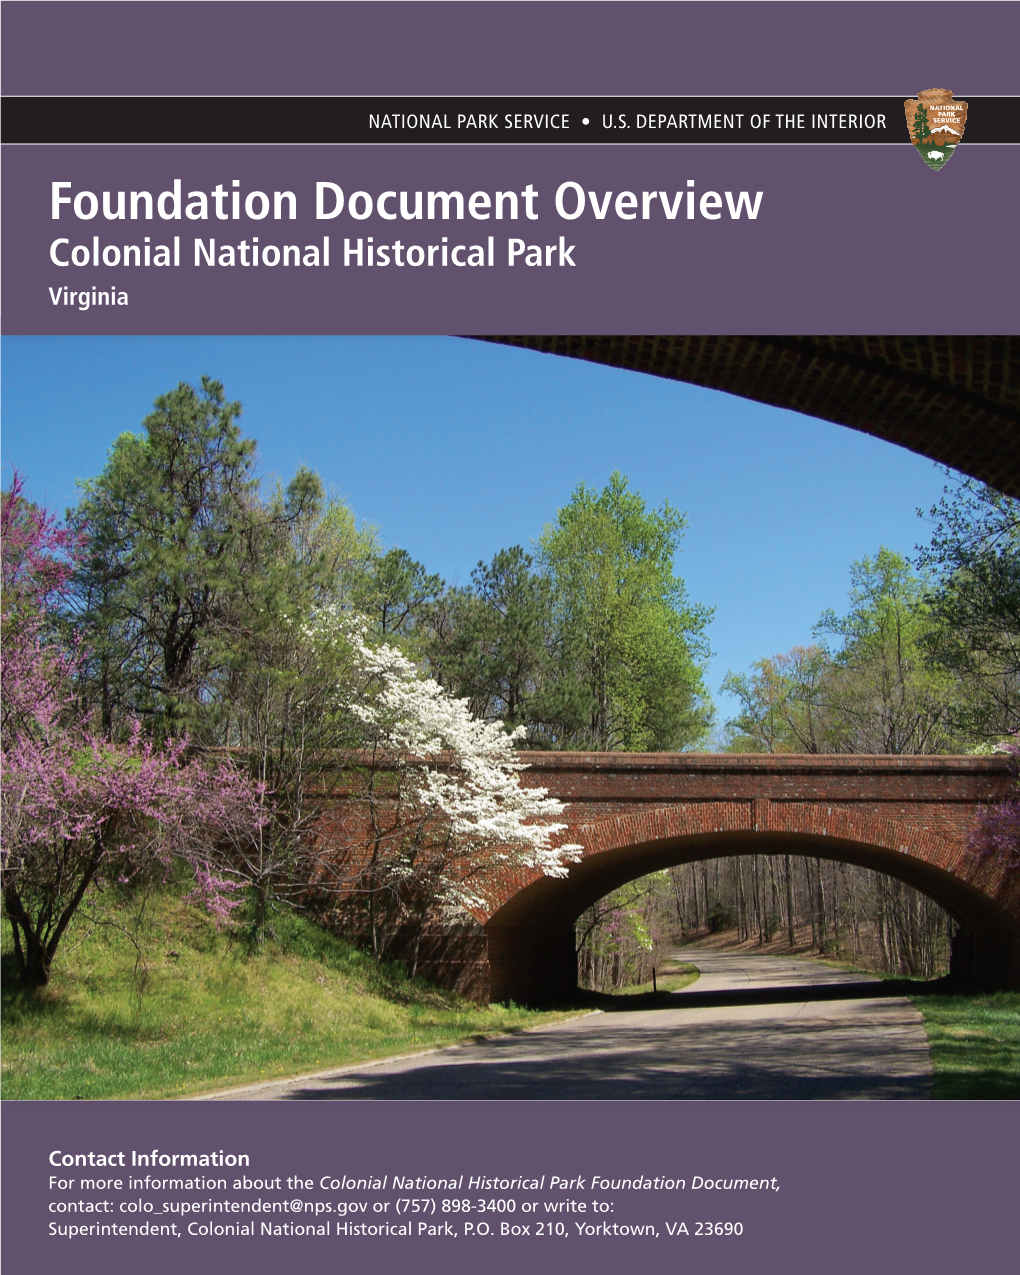 Foundation Document Overview, Colonial National Historical Park